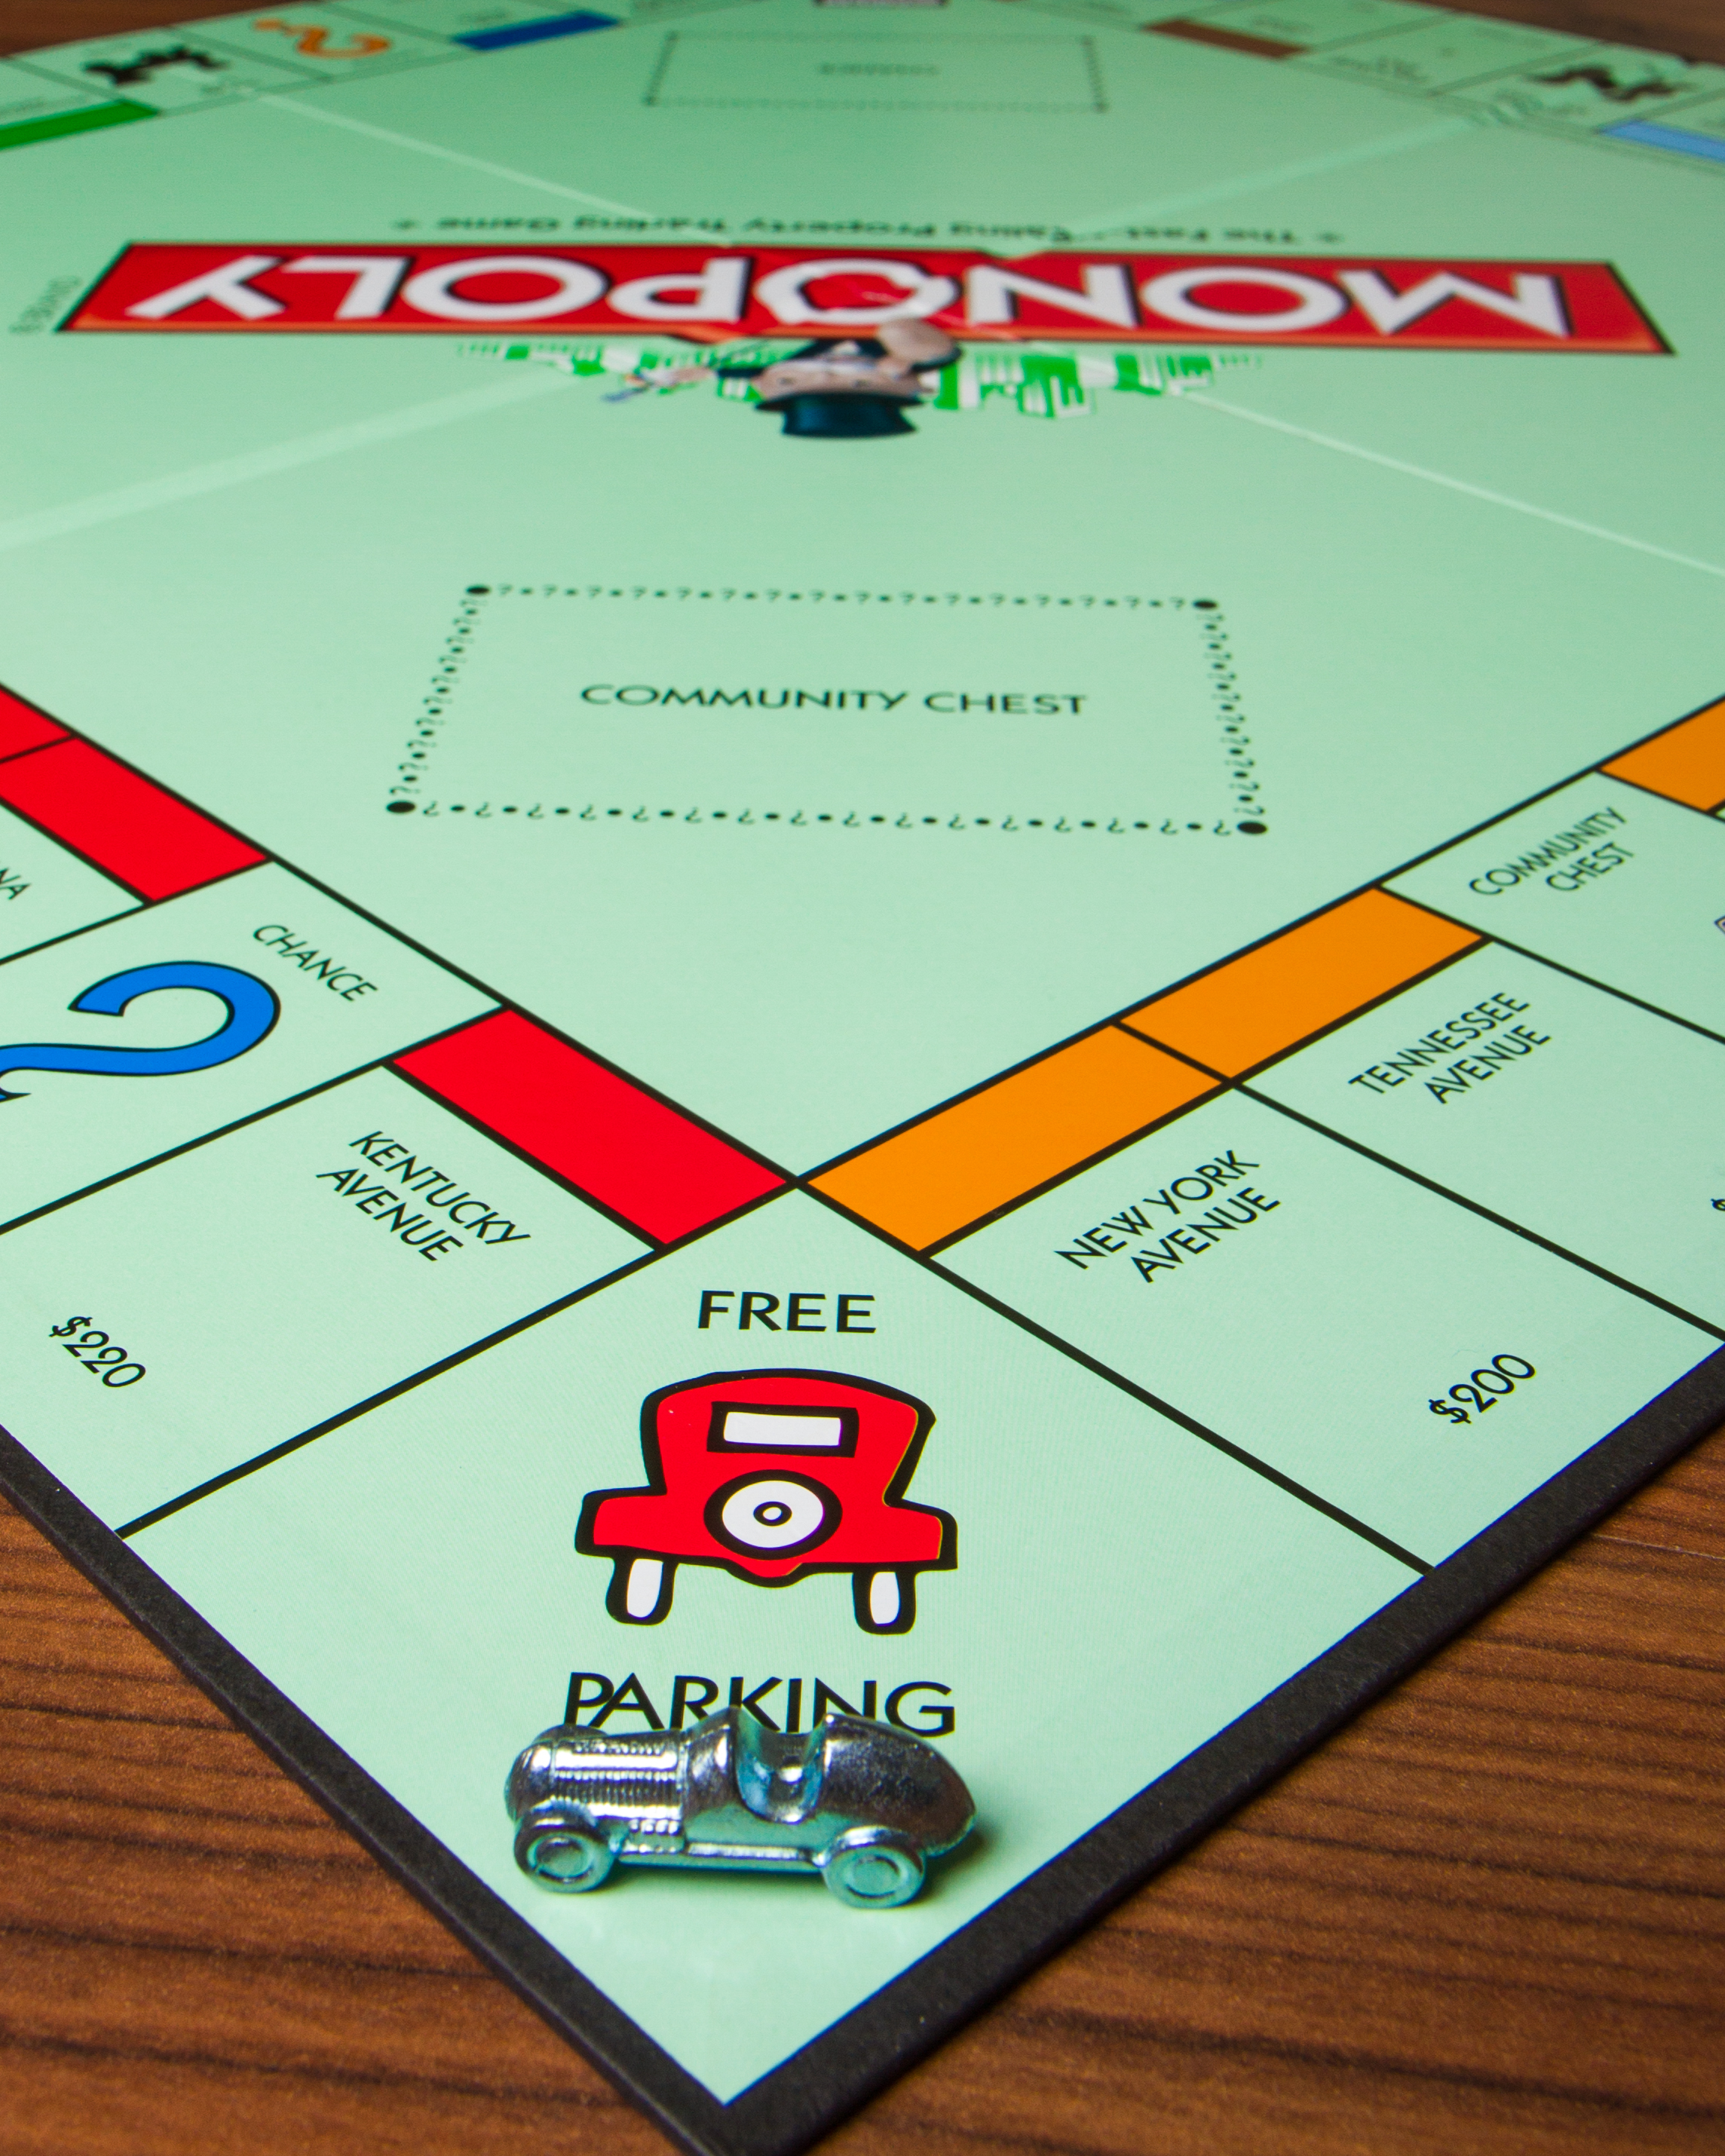 what-exactly-does-landing-on-free-parking-do-in-a-game-of-monopoly